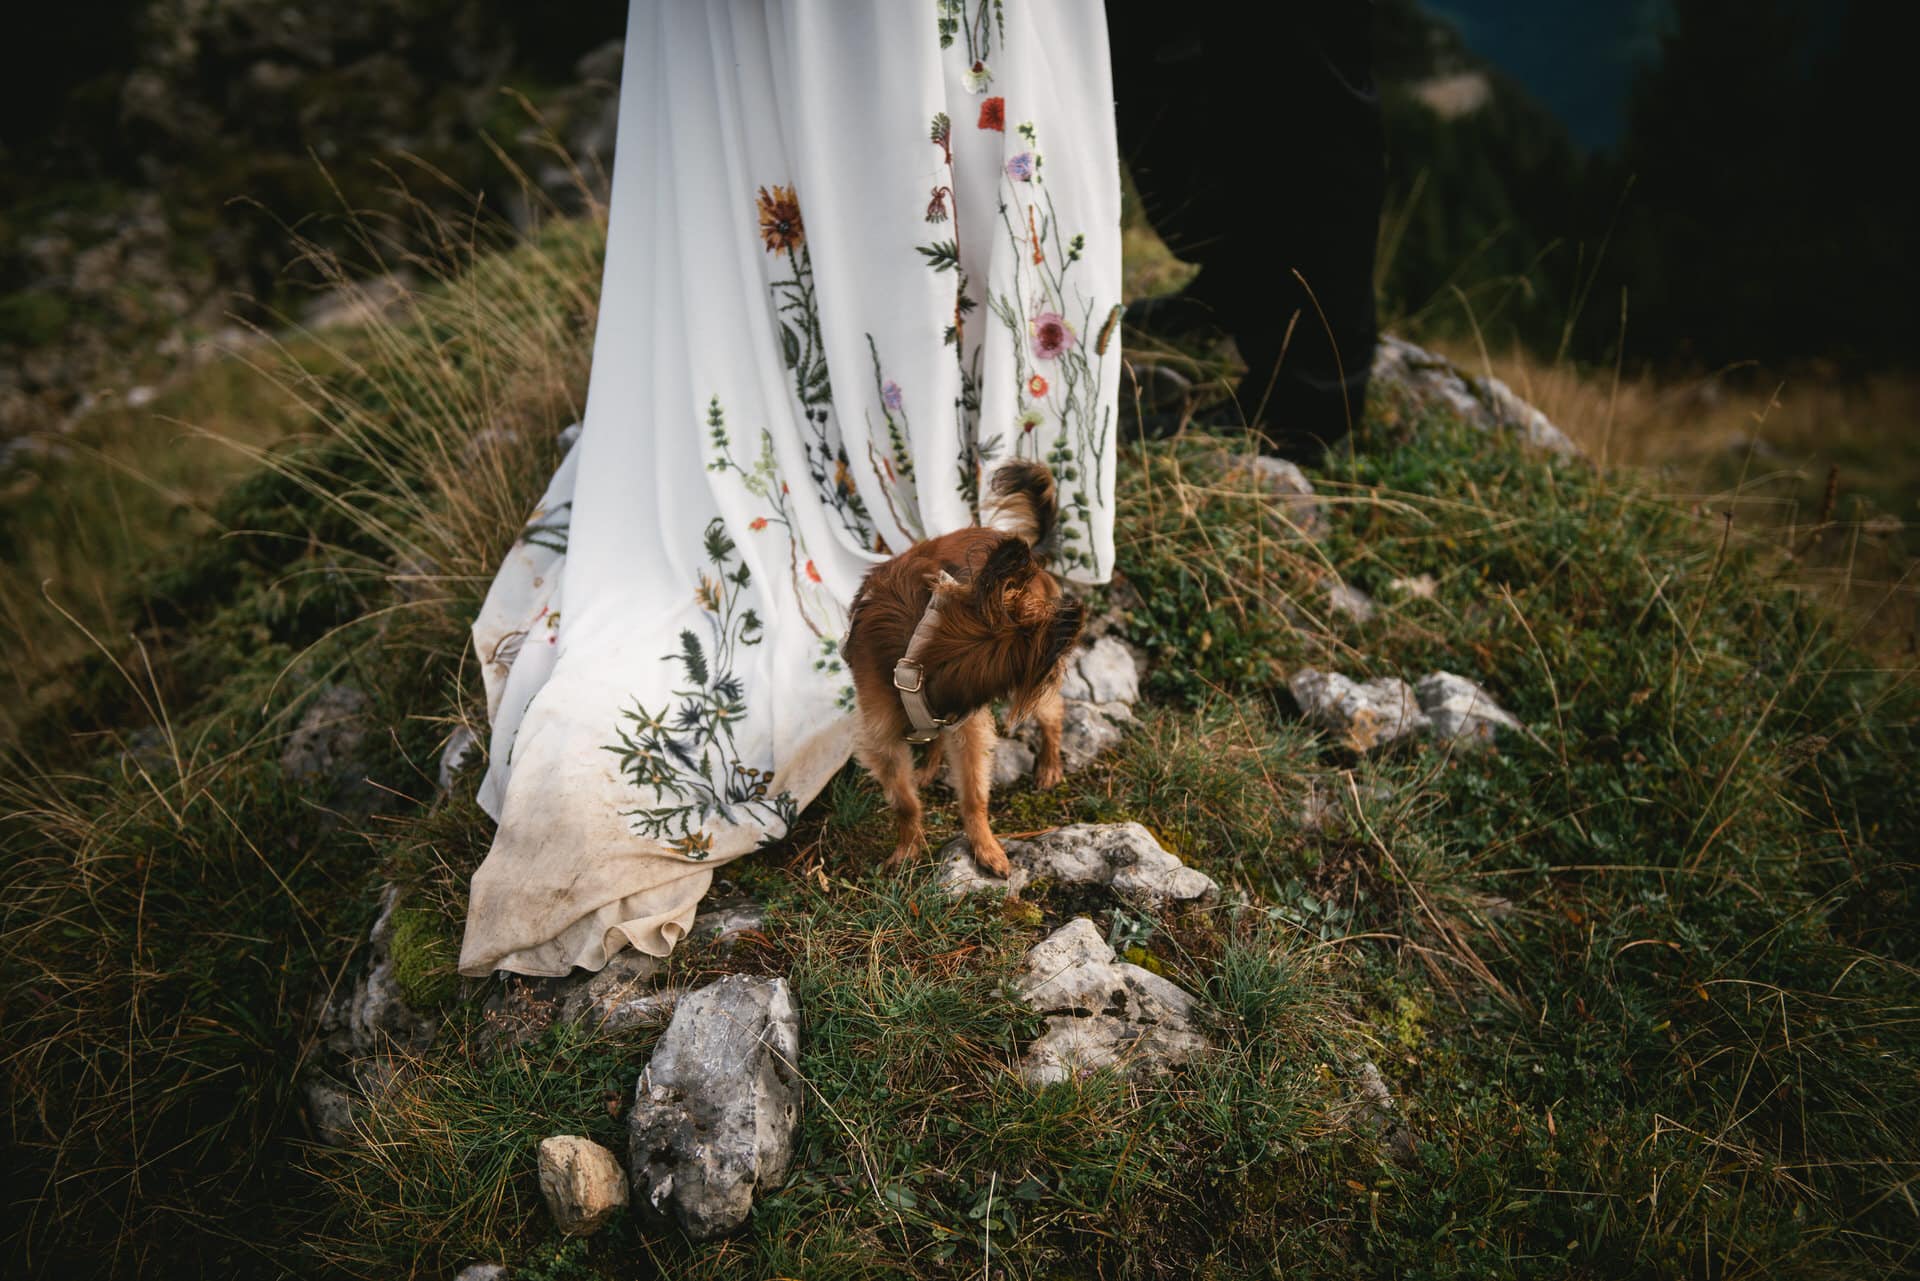 Couple walking in the mountains for an elopement photoshoot in Switzerland